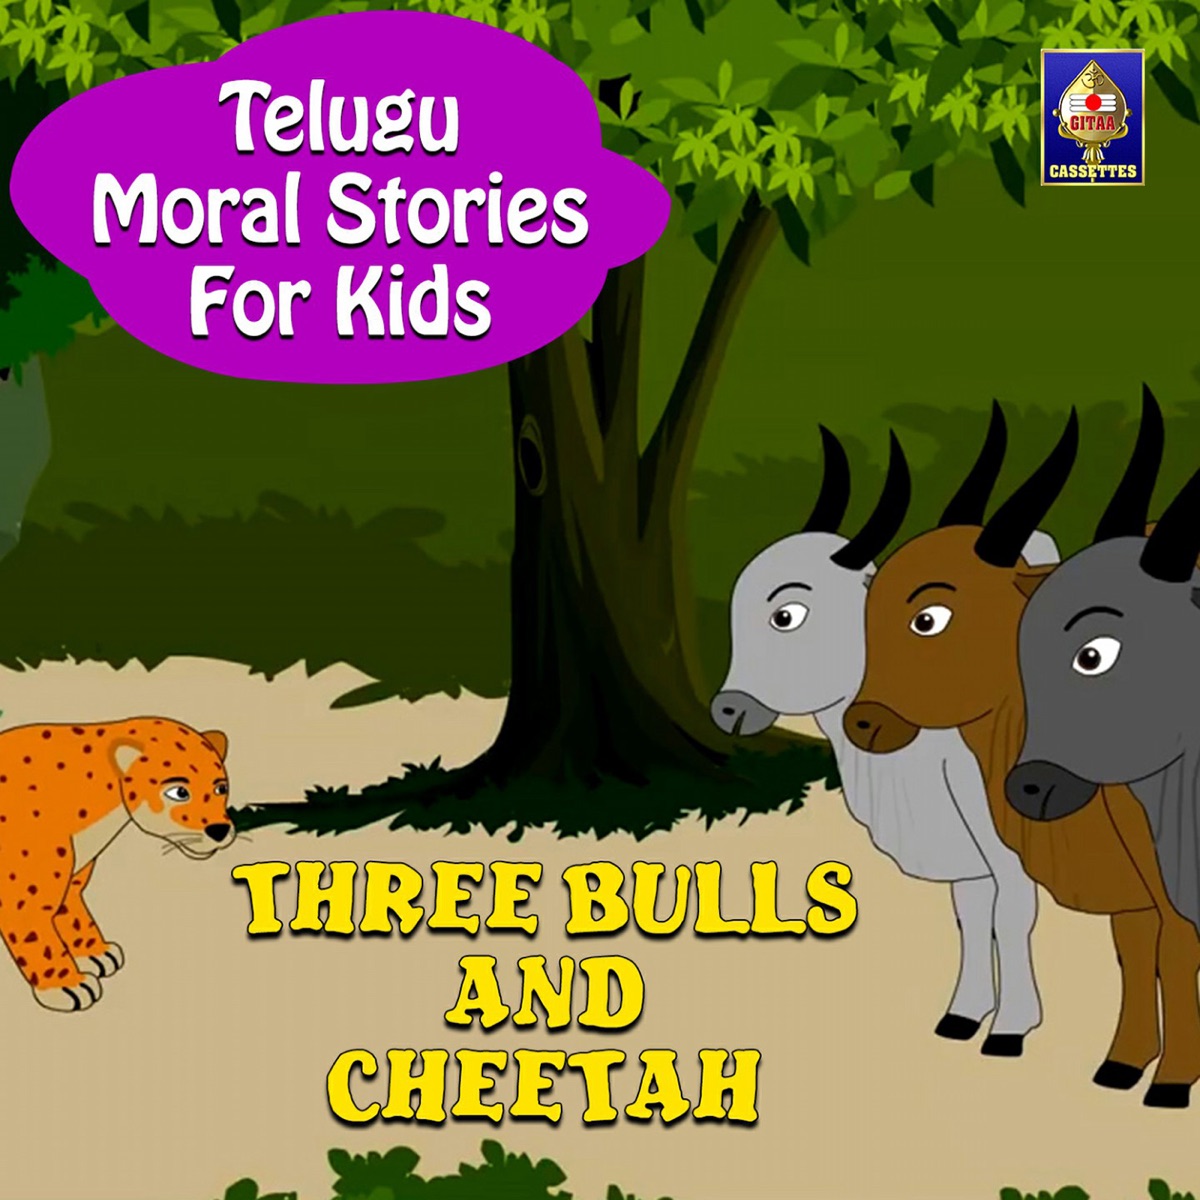 Telugu Moral Stories For Kids - The Story of the Crow and Sparrow - Single  by Sandeep on Apple Music